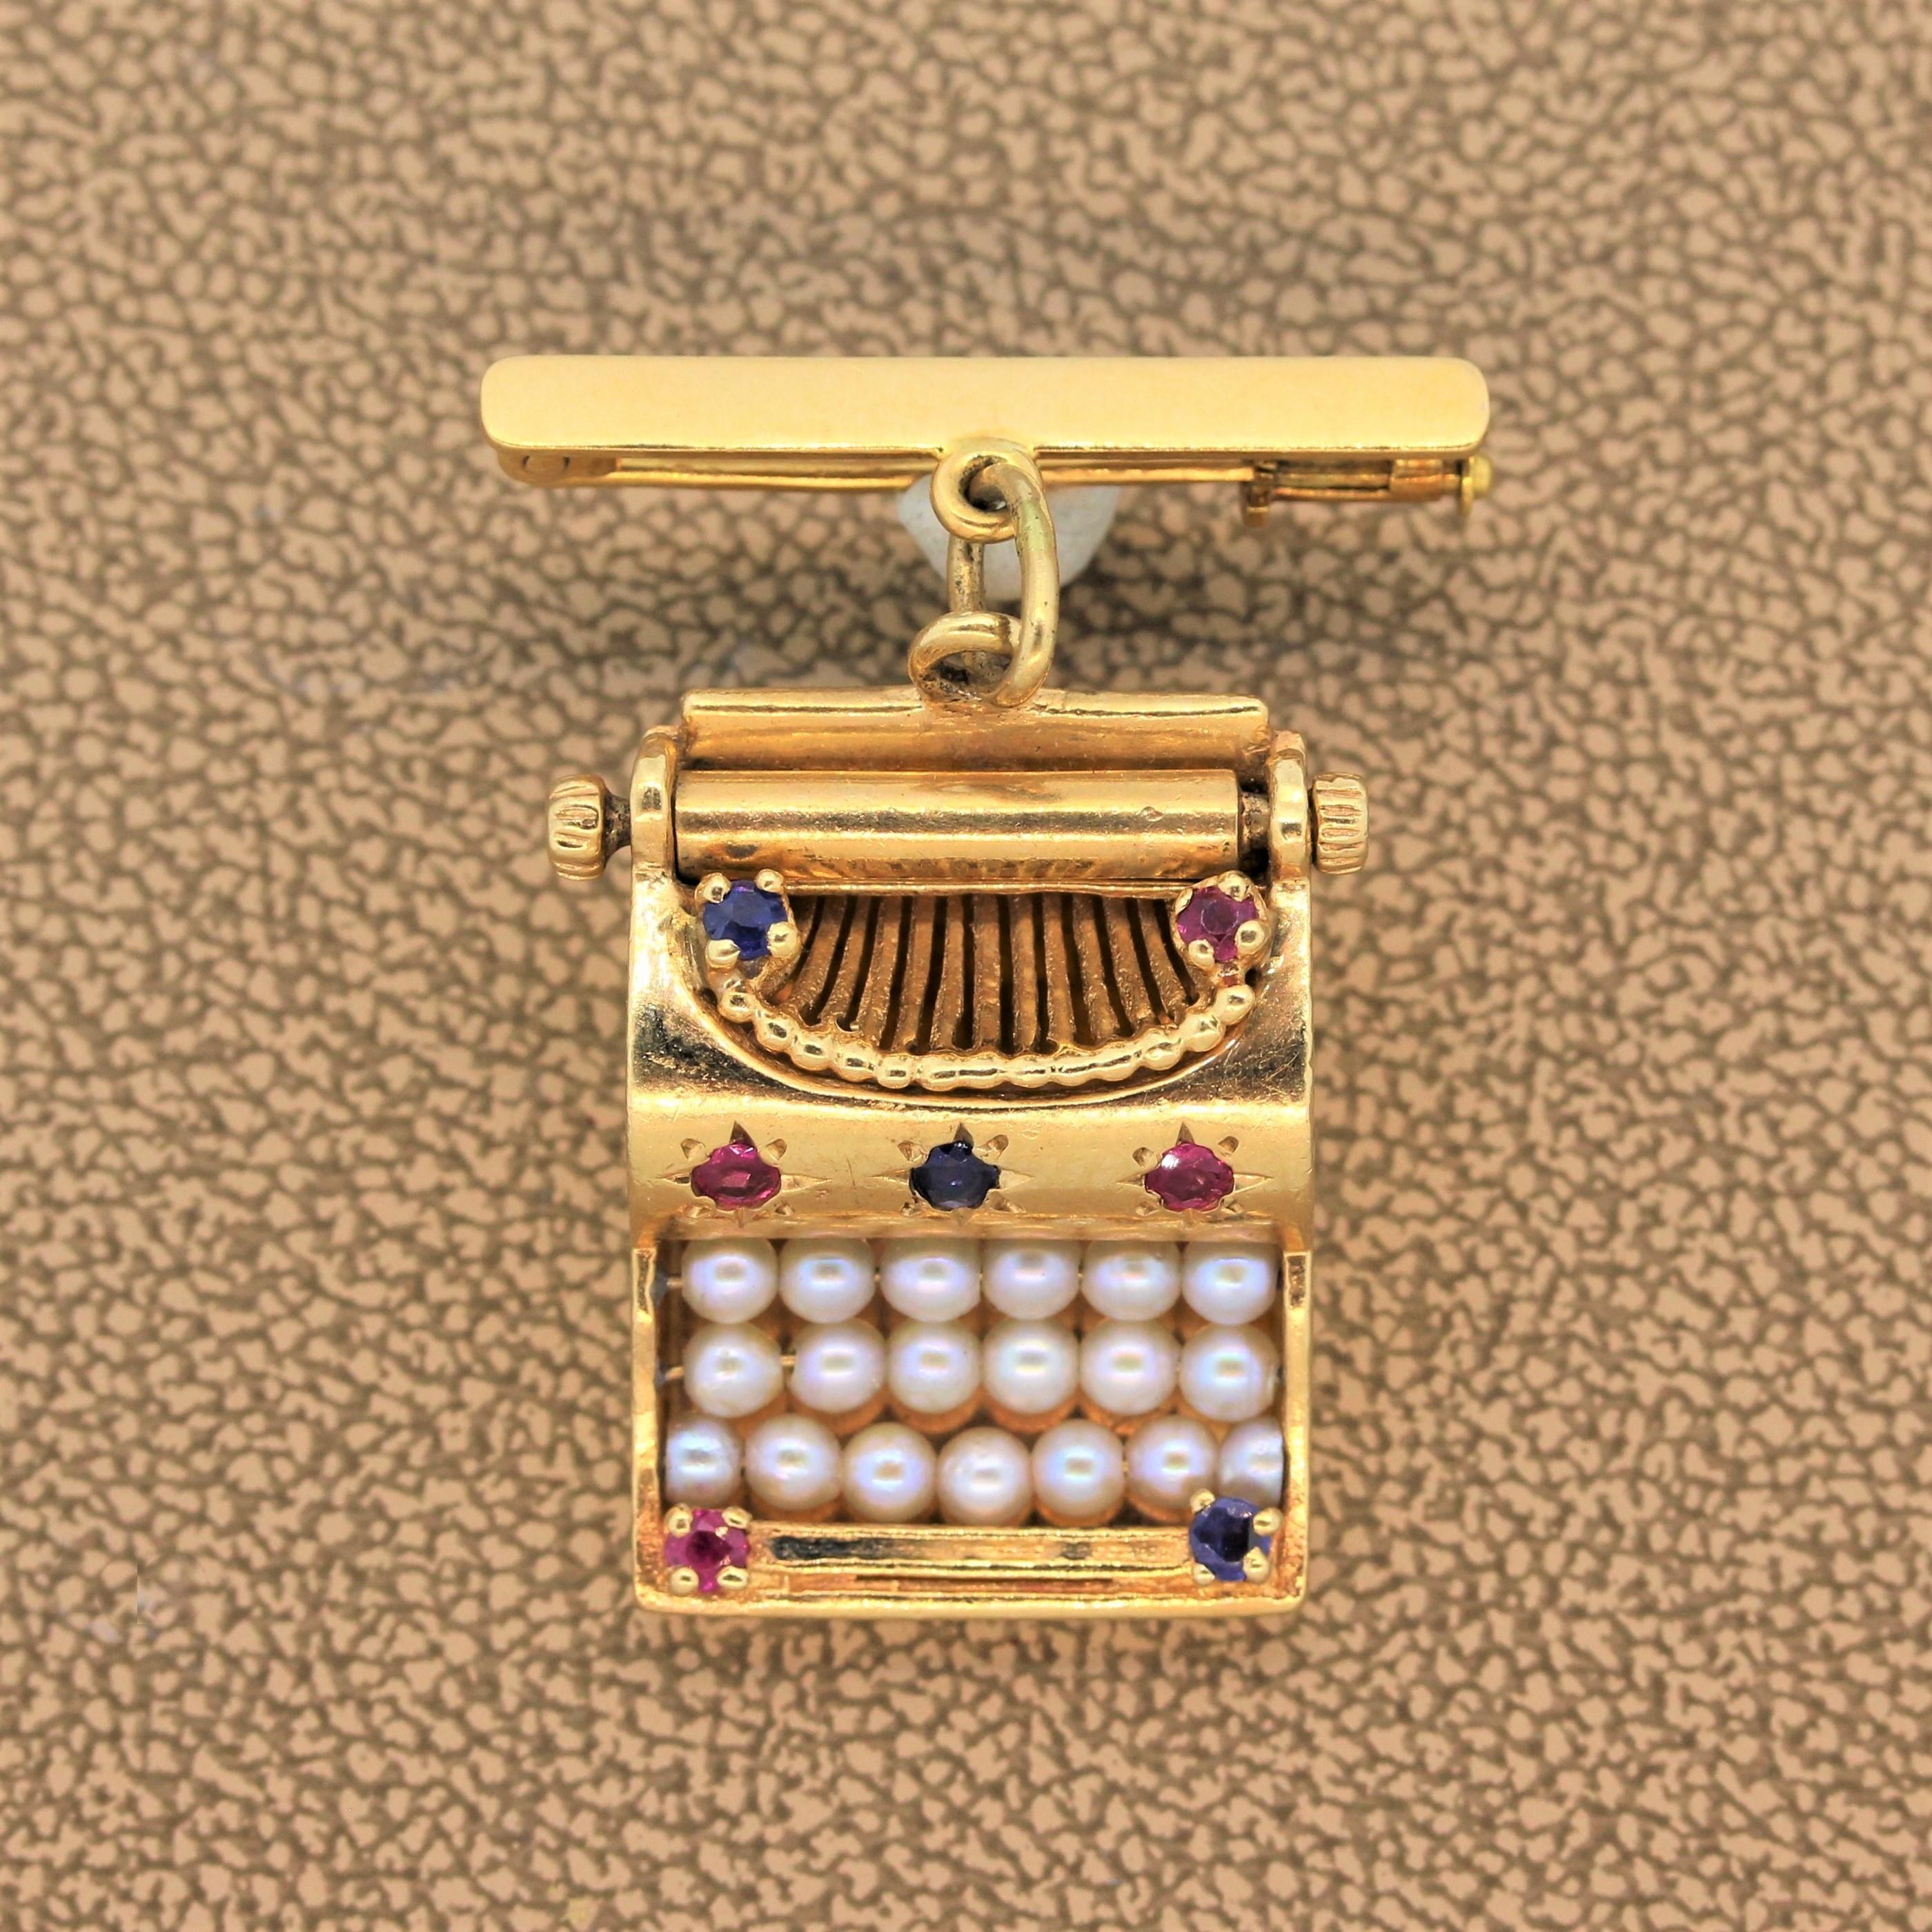 Remember your first typewriter? A typewriter for all your “Dear John” letters made of 14K yellow gold. The keys are lined with seed pearls along with red rubies and blue sapphires for embellishment. This typewriter is a step up from your MacBook